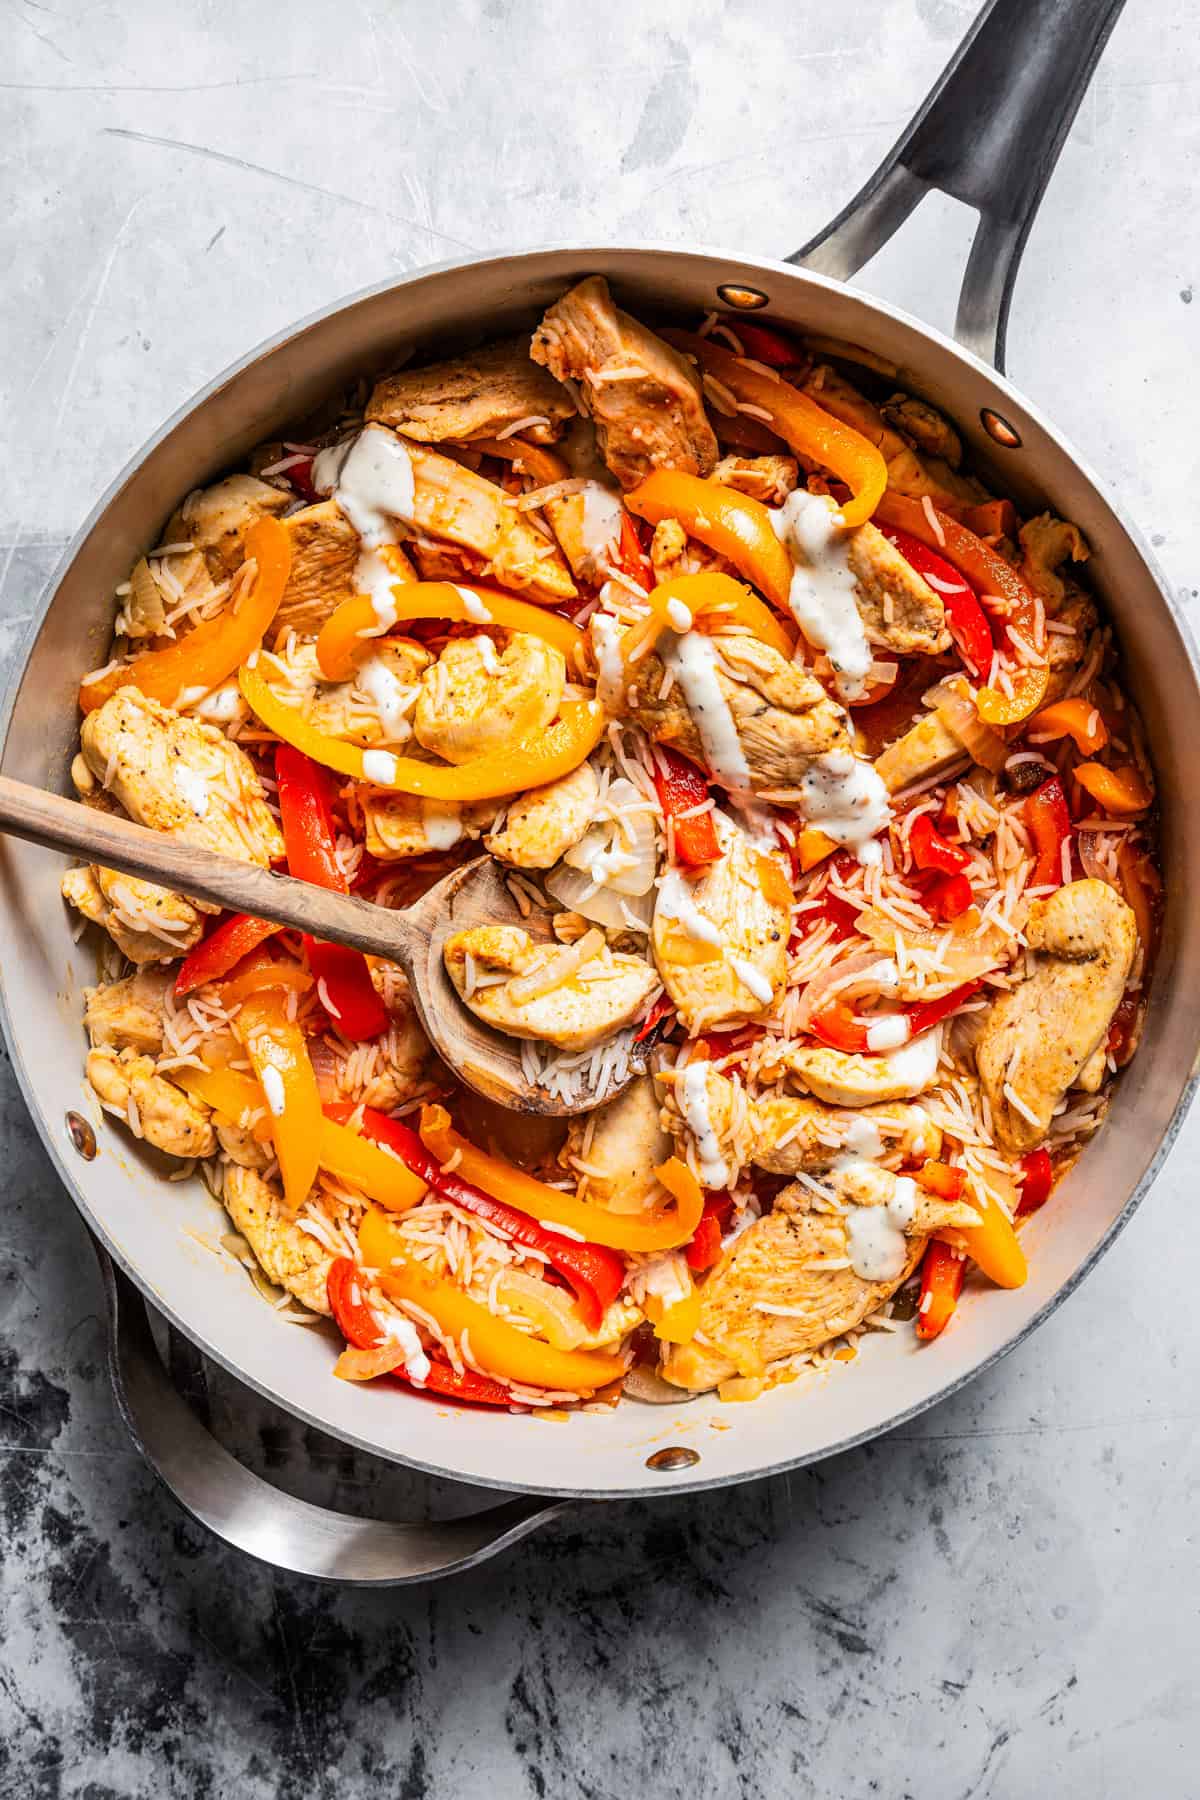 Wooden spoon stirring ranch dressing into a skillet of chicken fajitas.